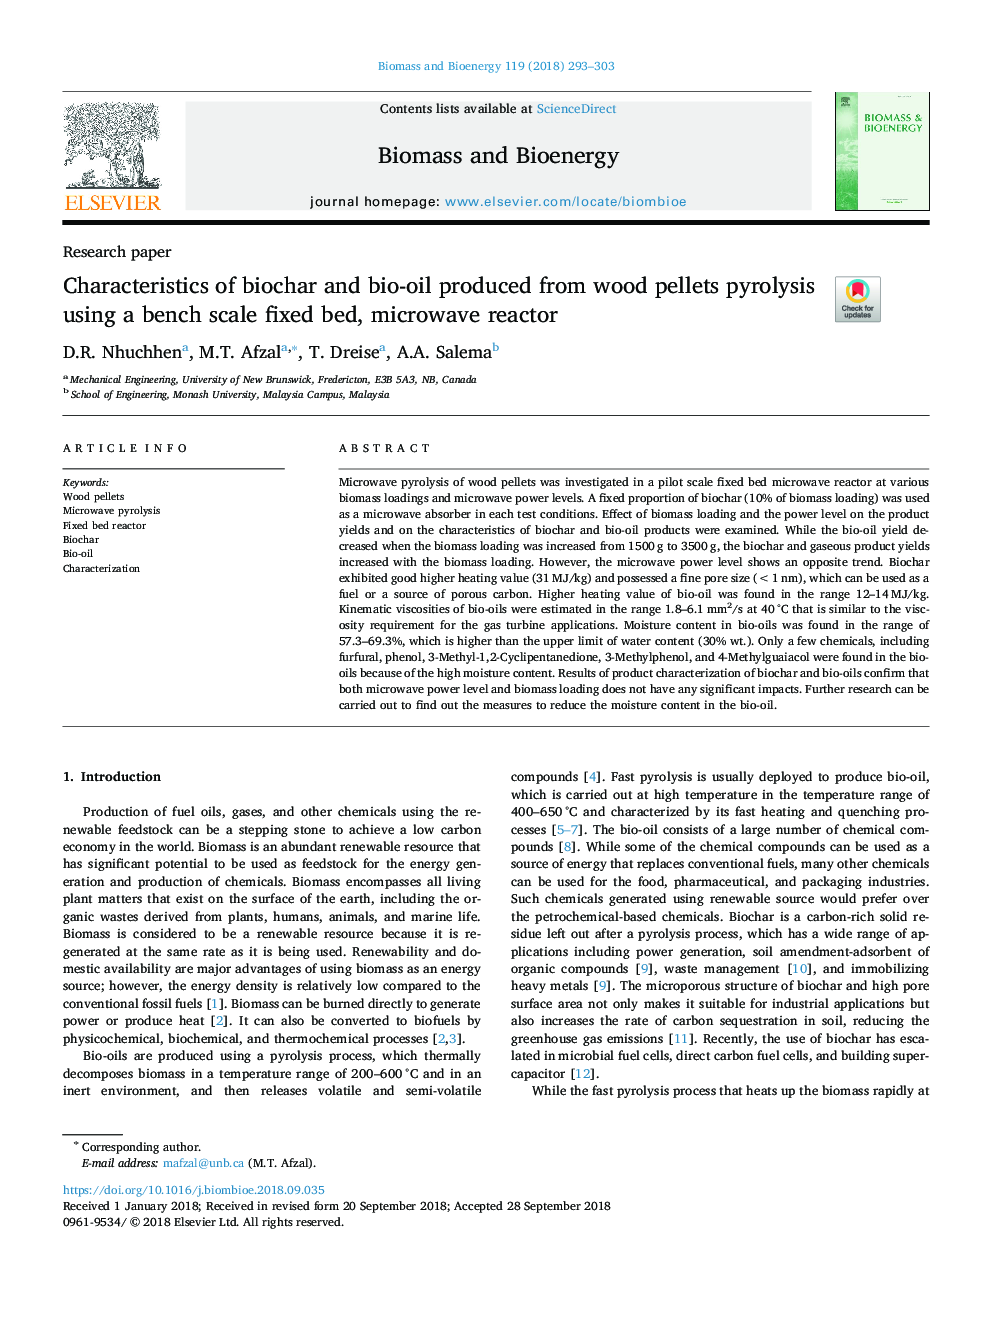 Characteristics of biochar and bio-oil produced from wood pellets pyrolysis using a bench scale fixed bed, microwave reactor